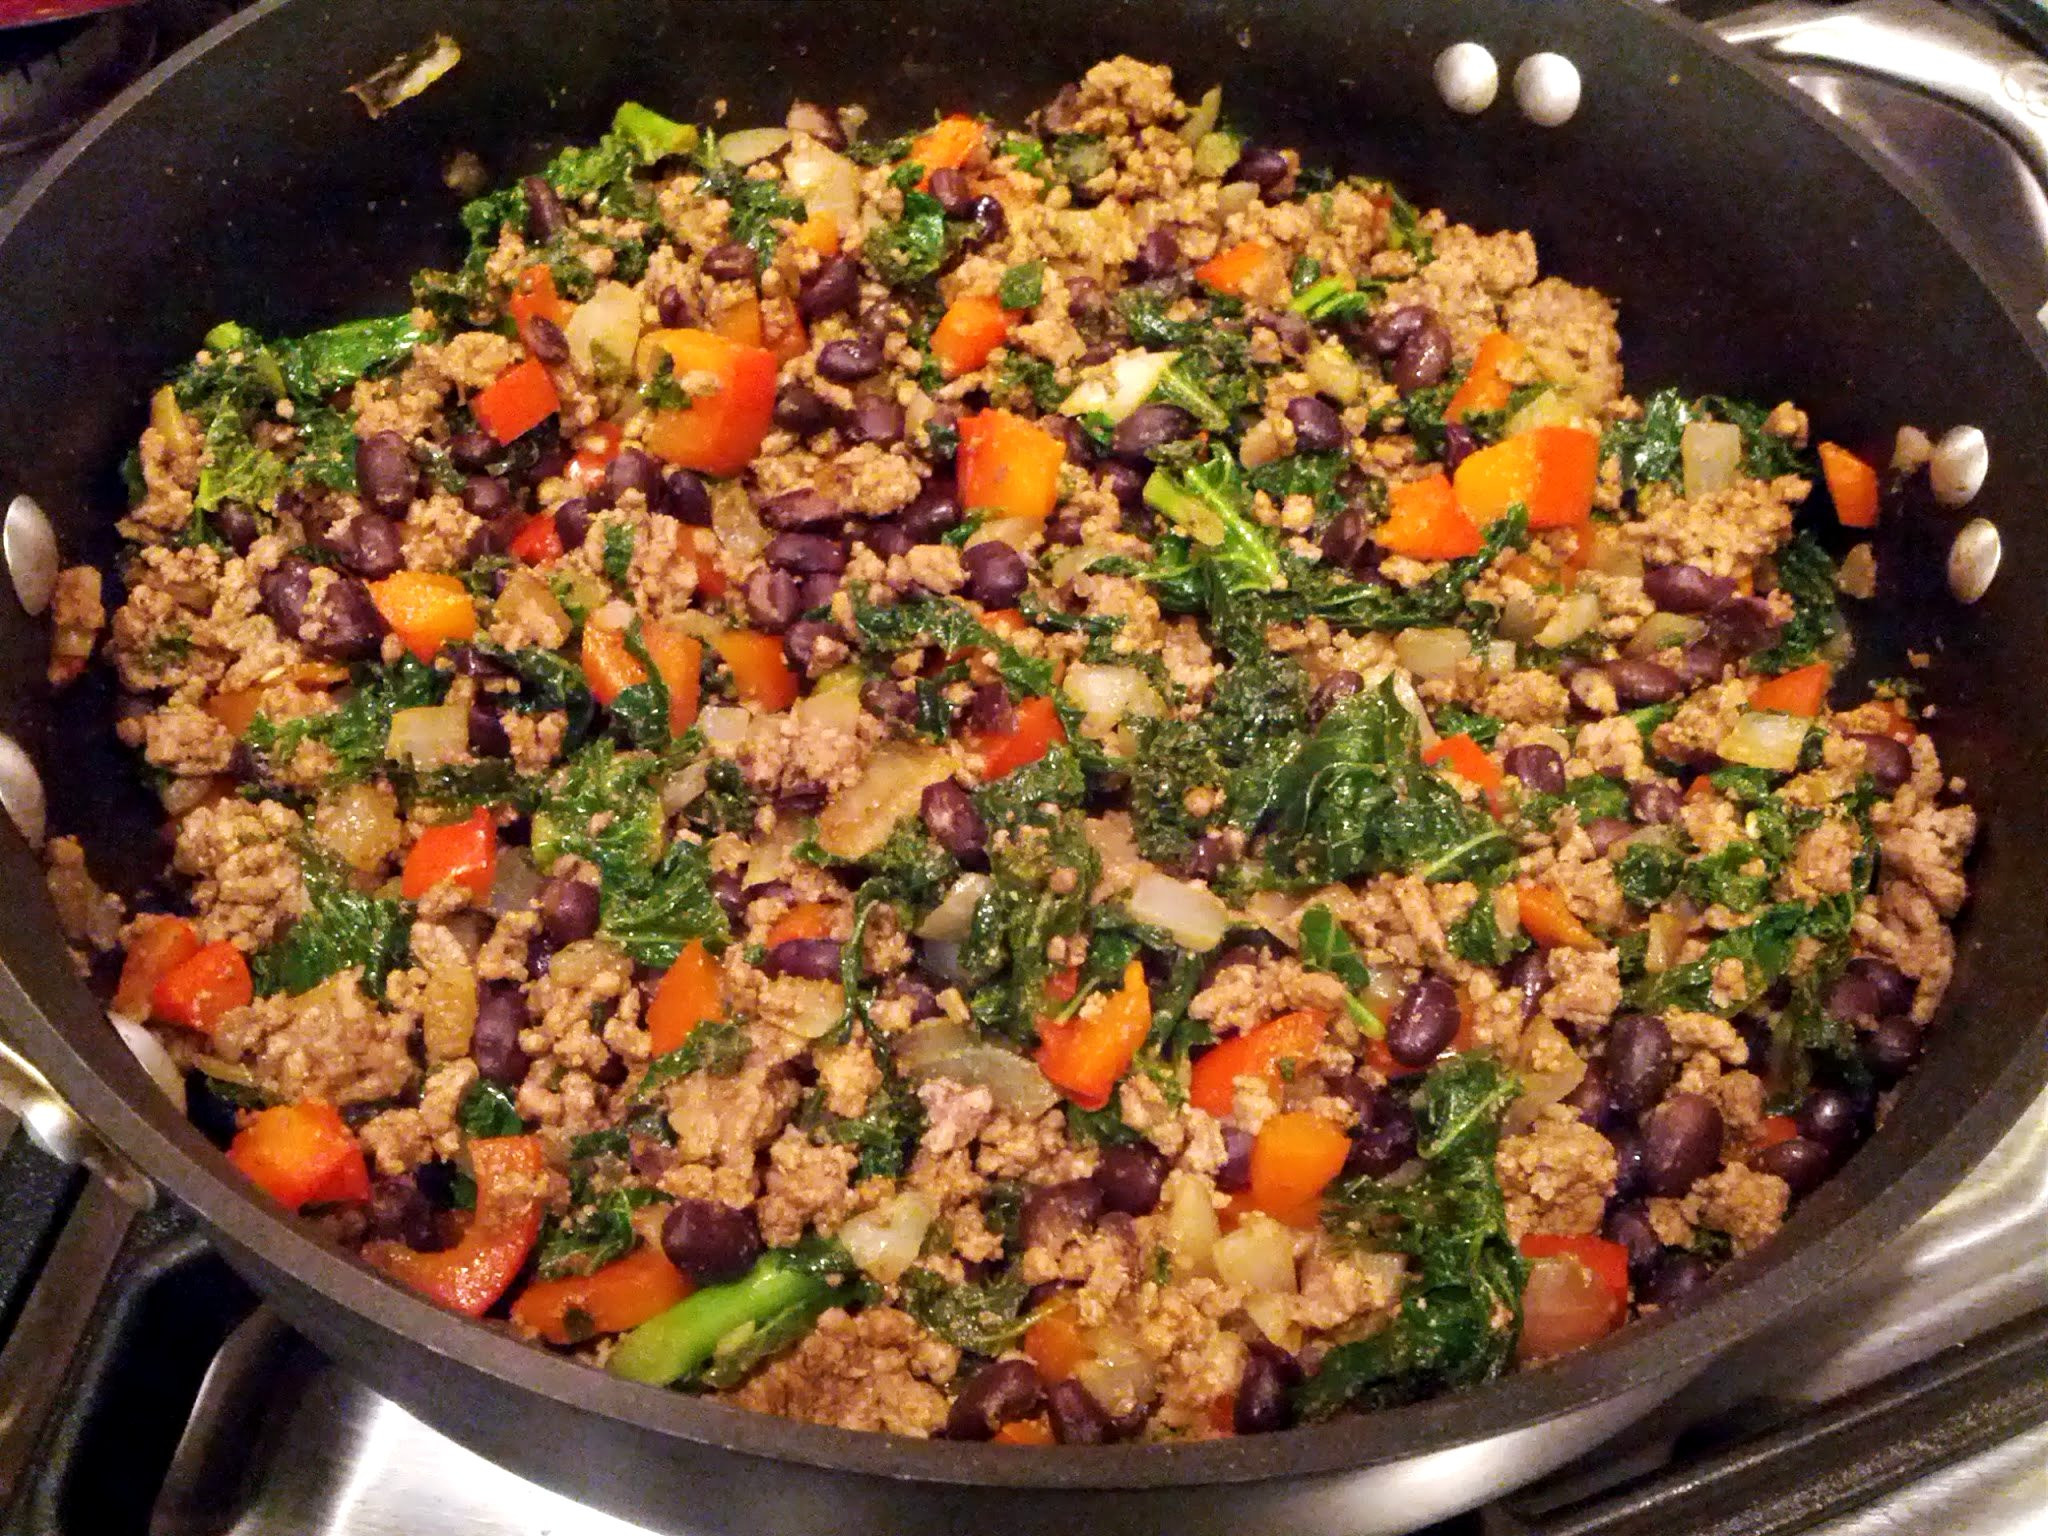 Kale Thanksgiving Recipes
 Kale and Ground Beef Turkey Taco Filling